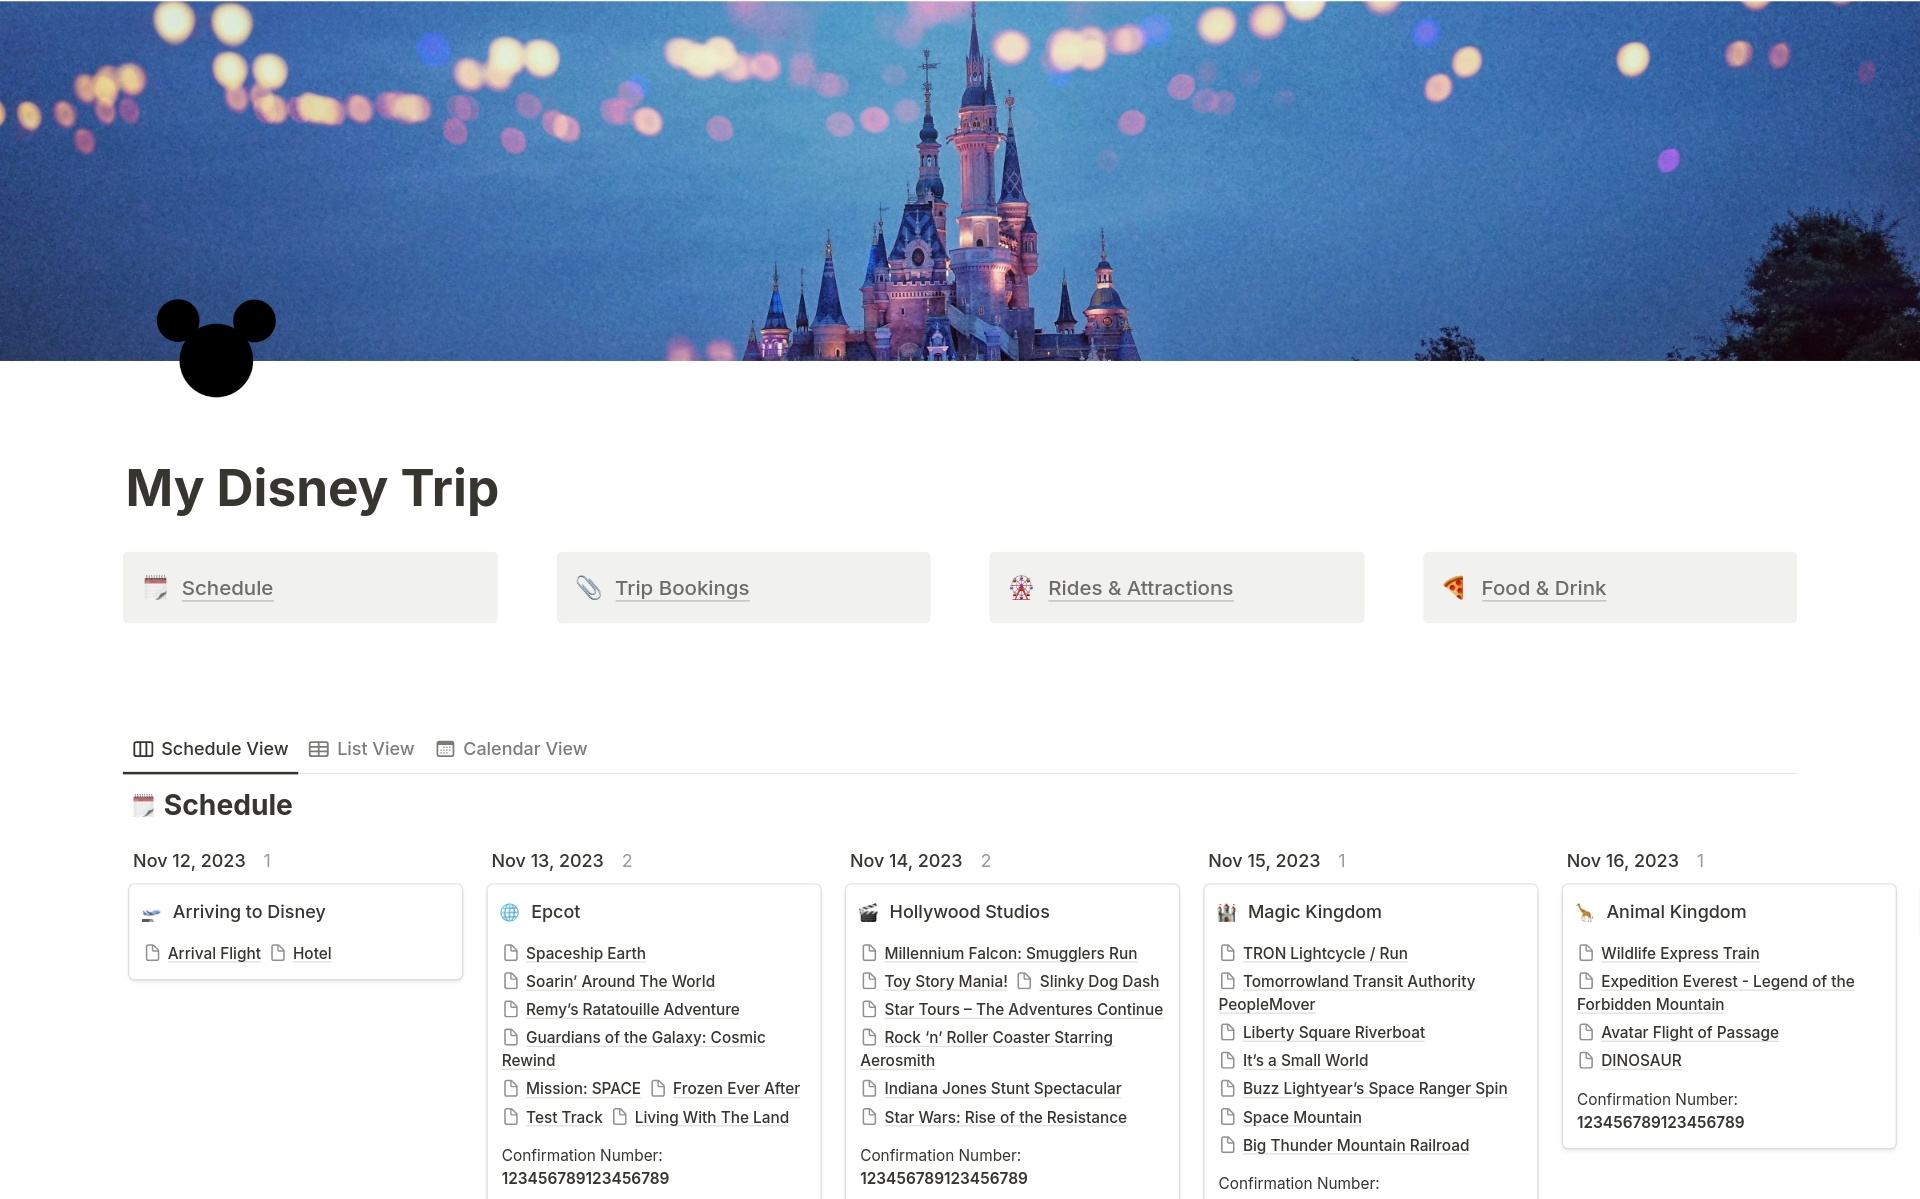 Plan your next Disney World trip with this comprehensive planner and directory!